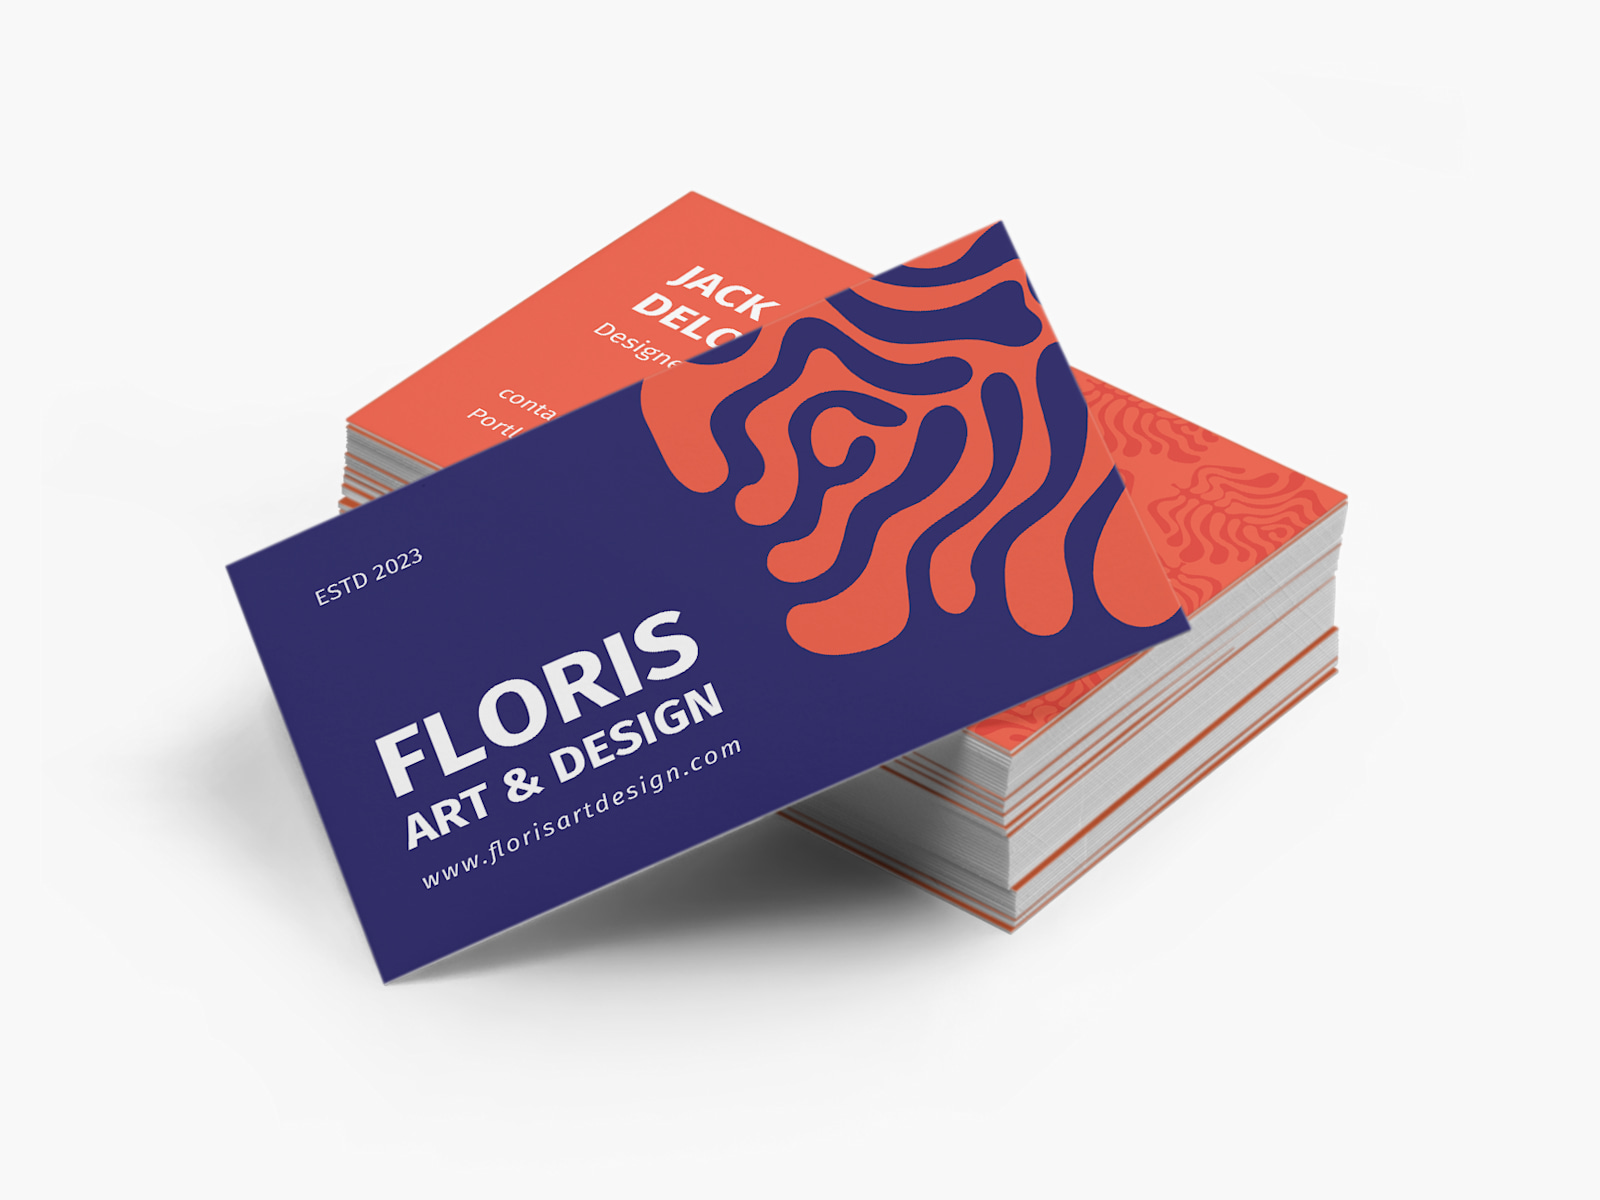 A standard business card with a purple and orange design.